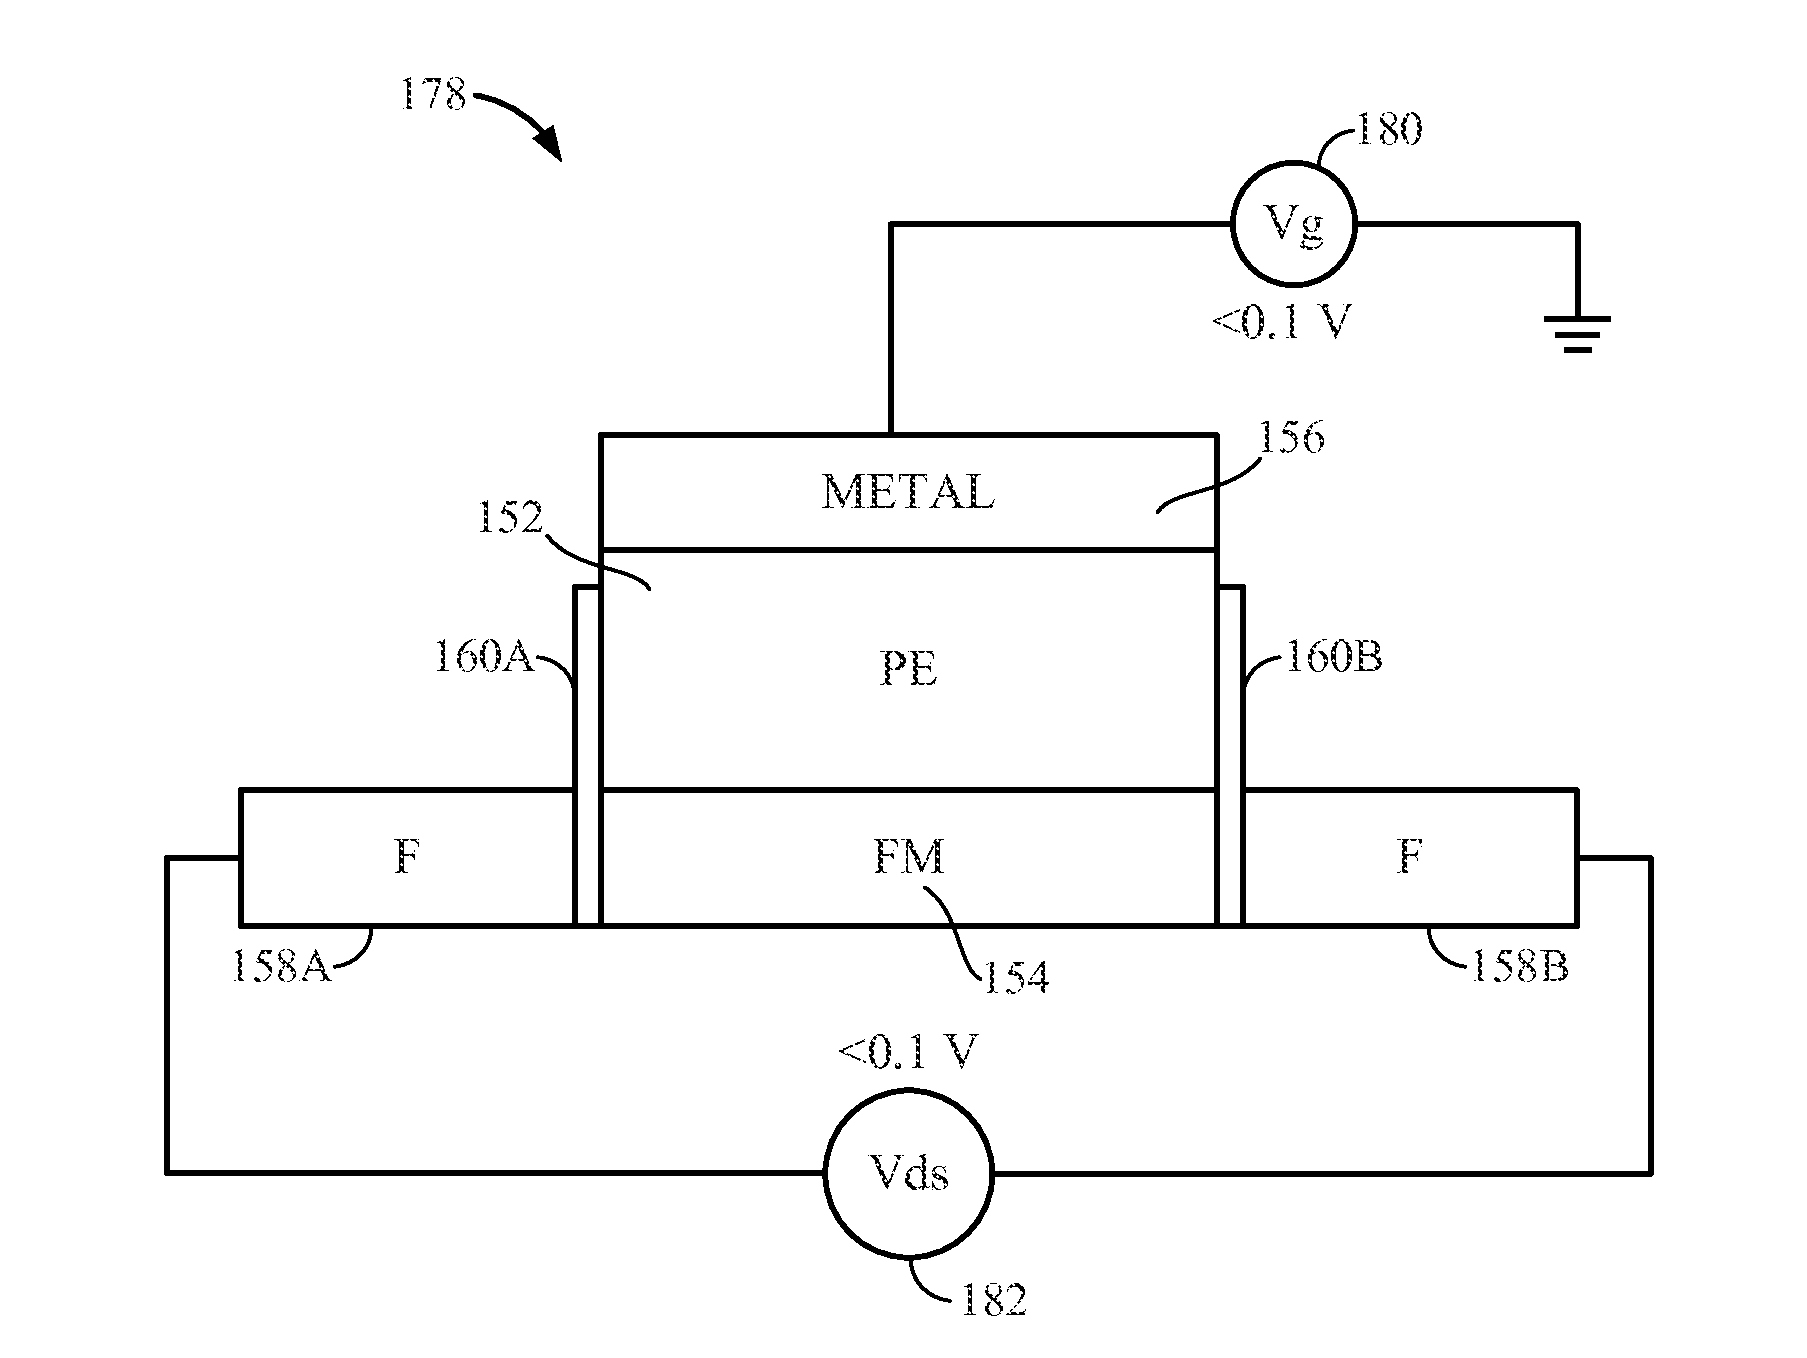 Spin Transistors Employing a Piezoelectric Layer and Related Memory, Memory Systems, and Methods